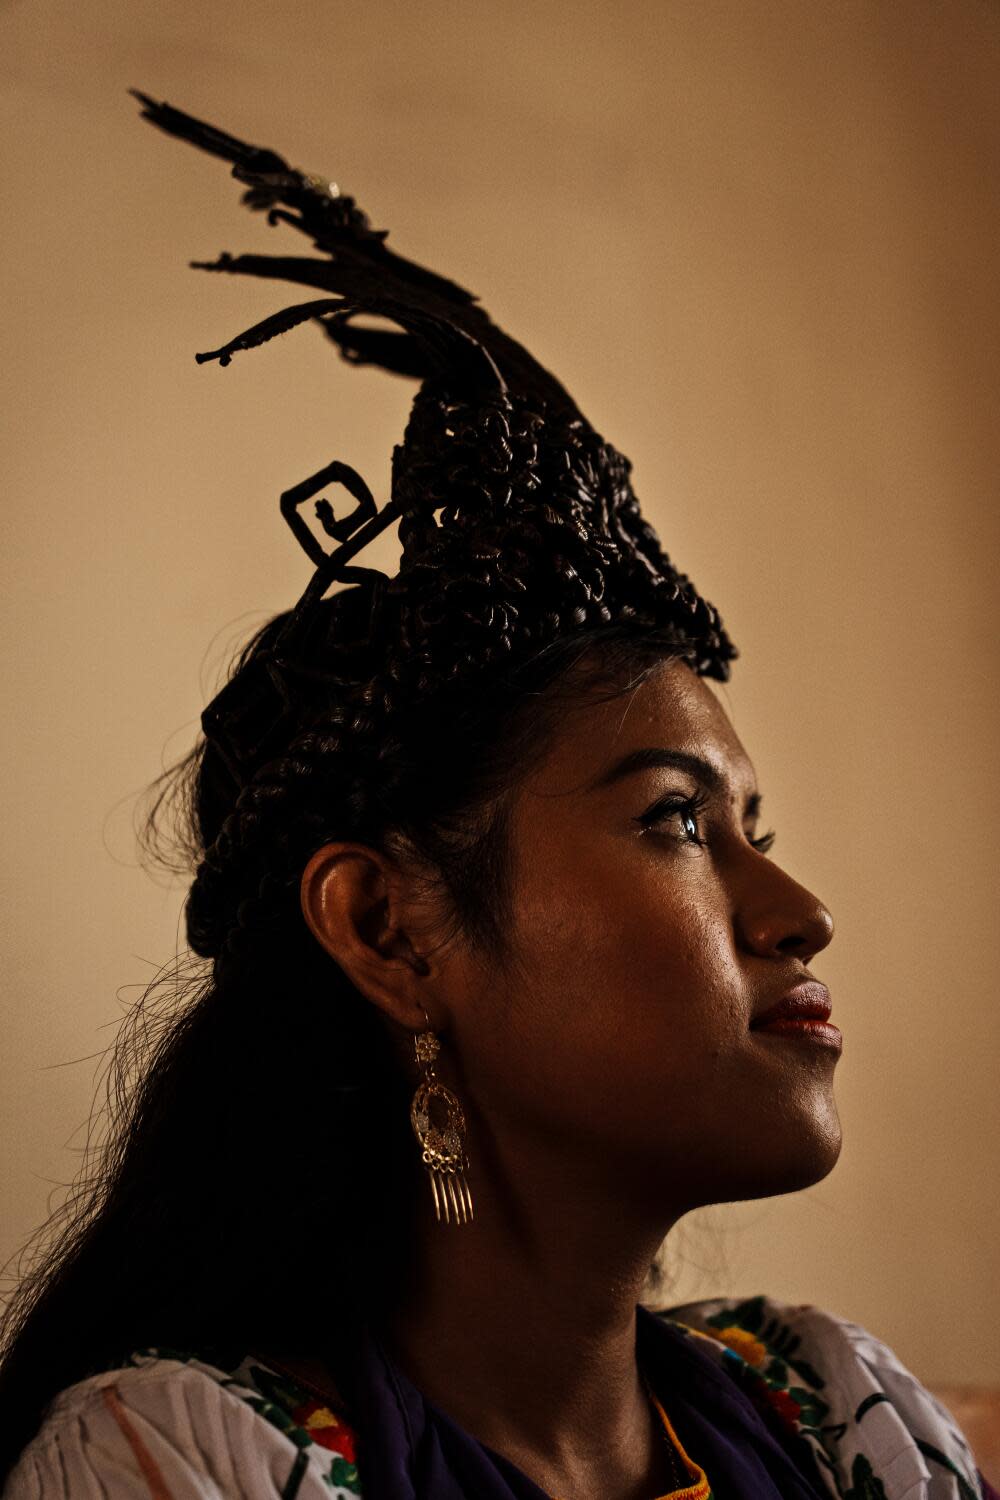 A woman with dark hair wearing a dark headdress, looking to the side